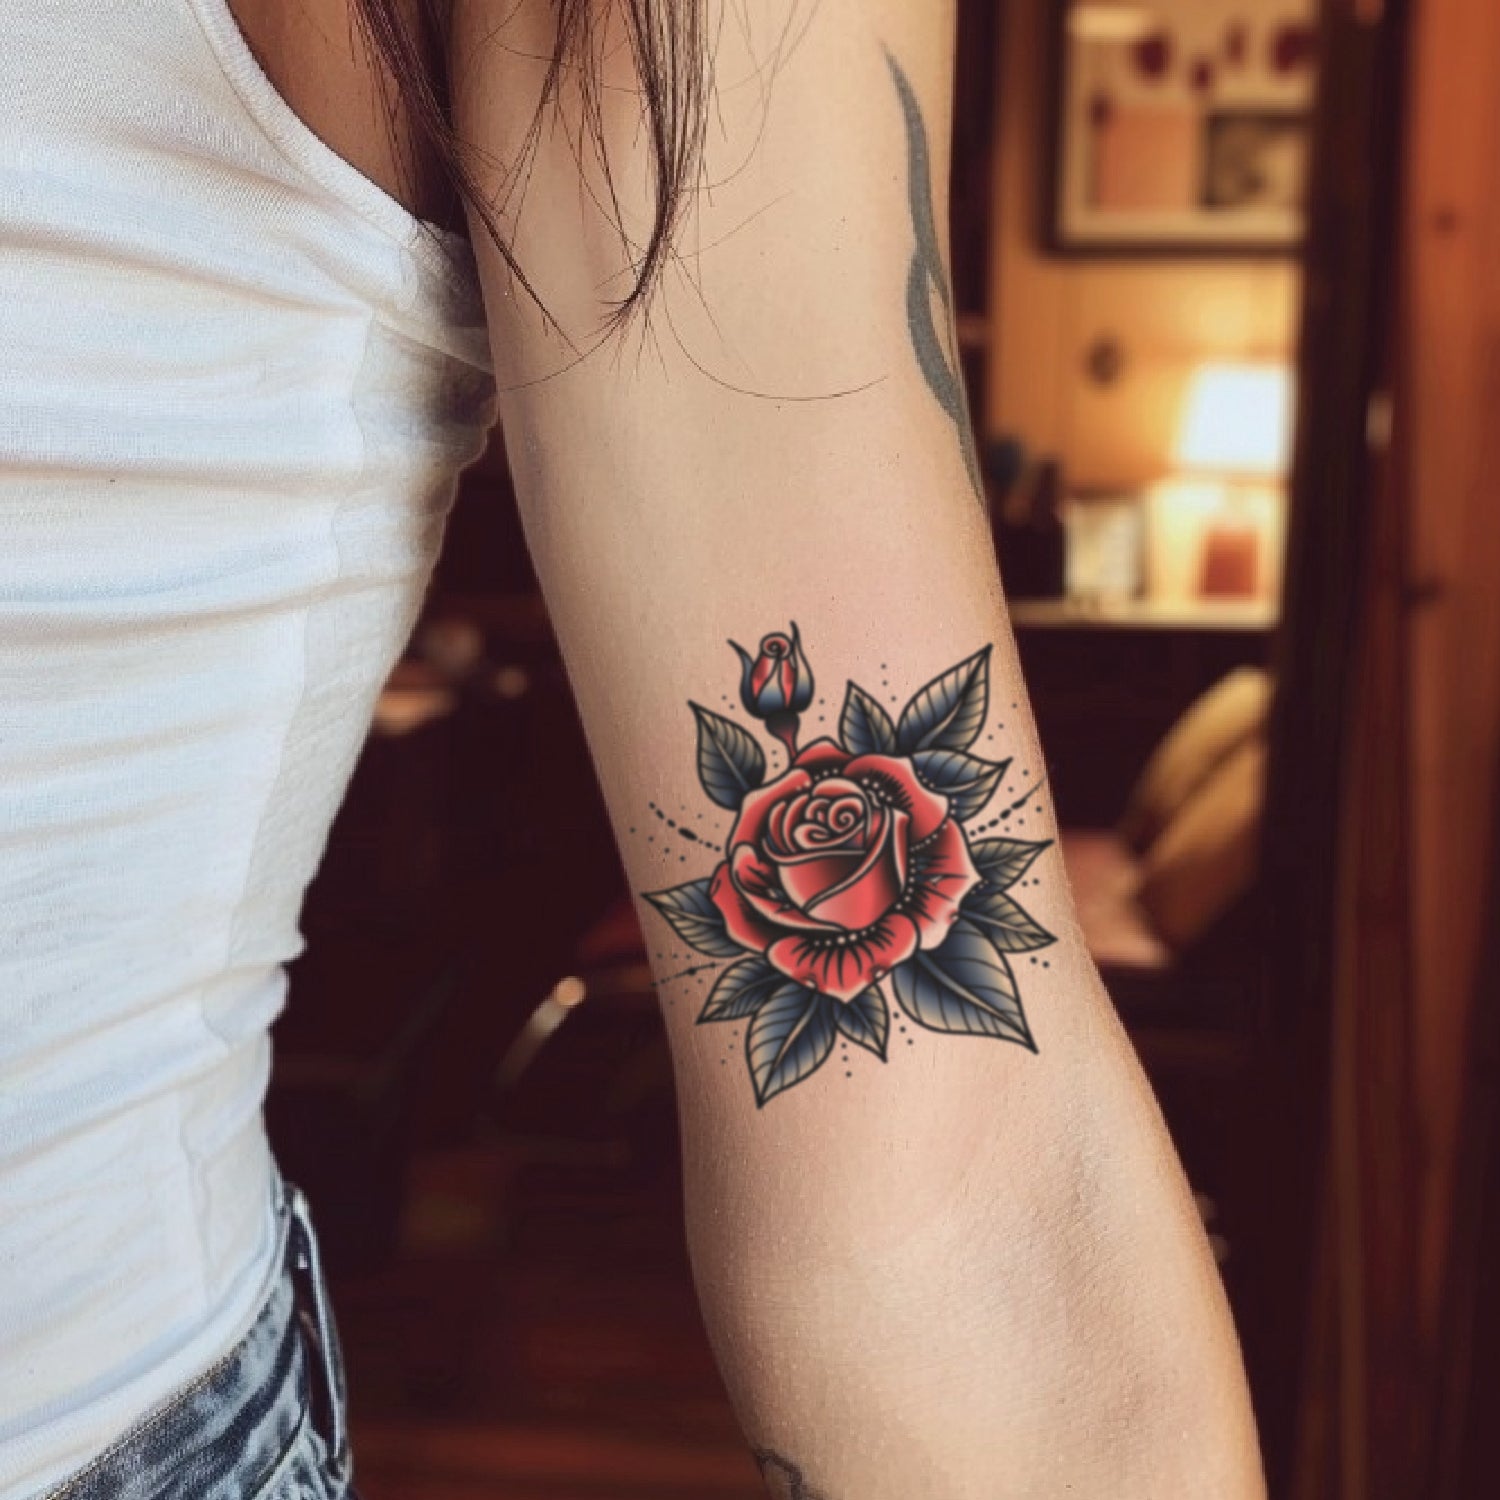 best cool simple small black color Traditional Rose Flower floral fake realistic temporary tattoo sticker design idea drawing for men and women on bicep upper inner arm